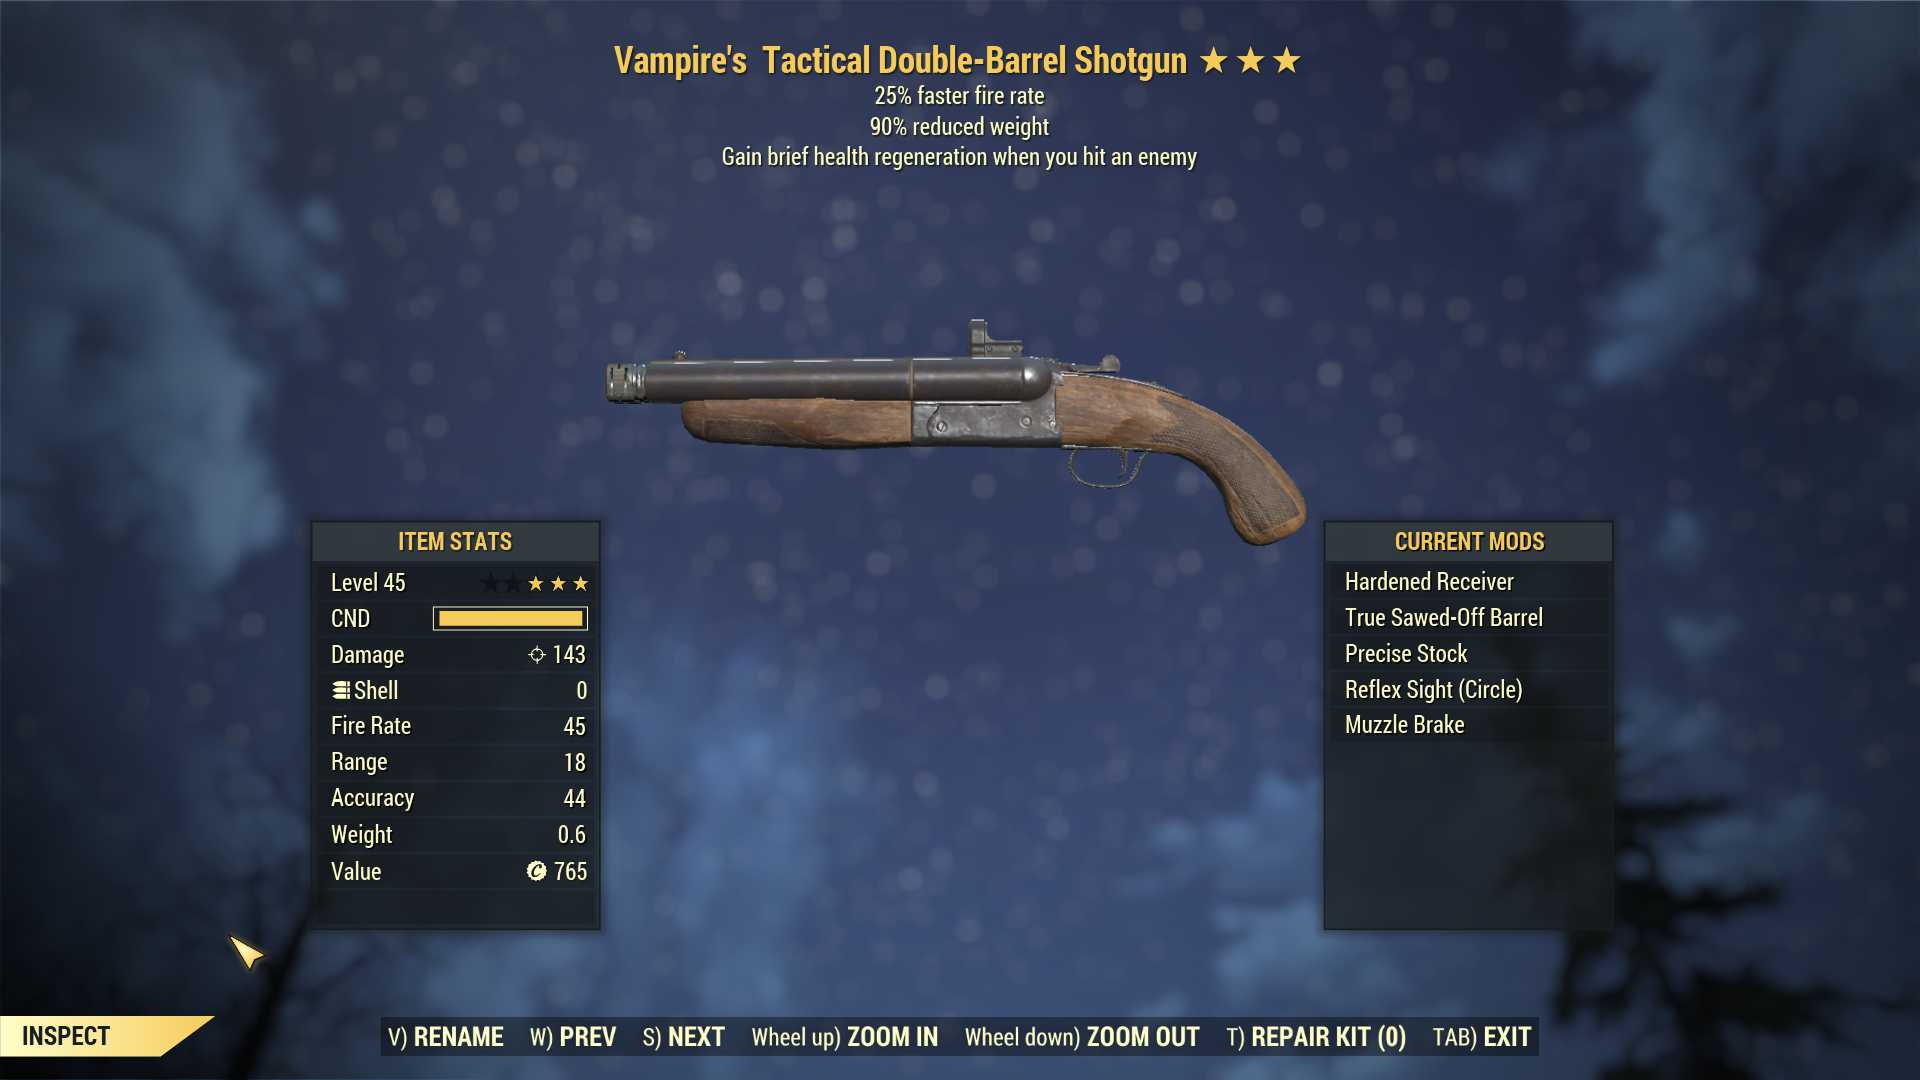 Vampire's Double-Barrel Shotgun (25% faster fire rate, 90% reduced weight)